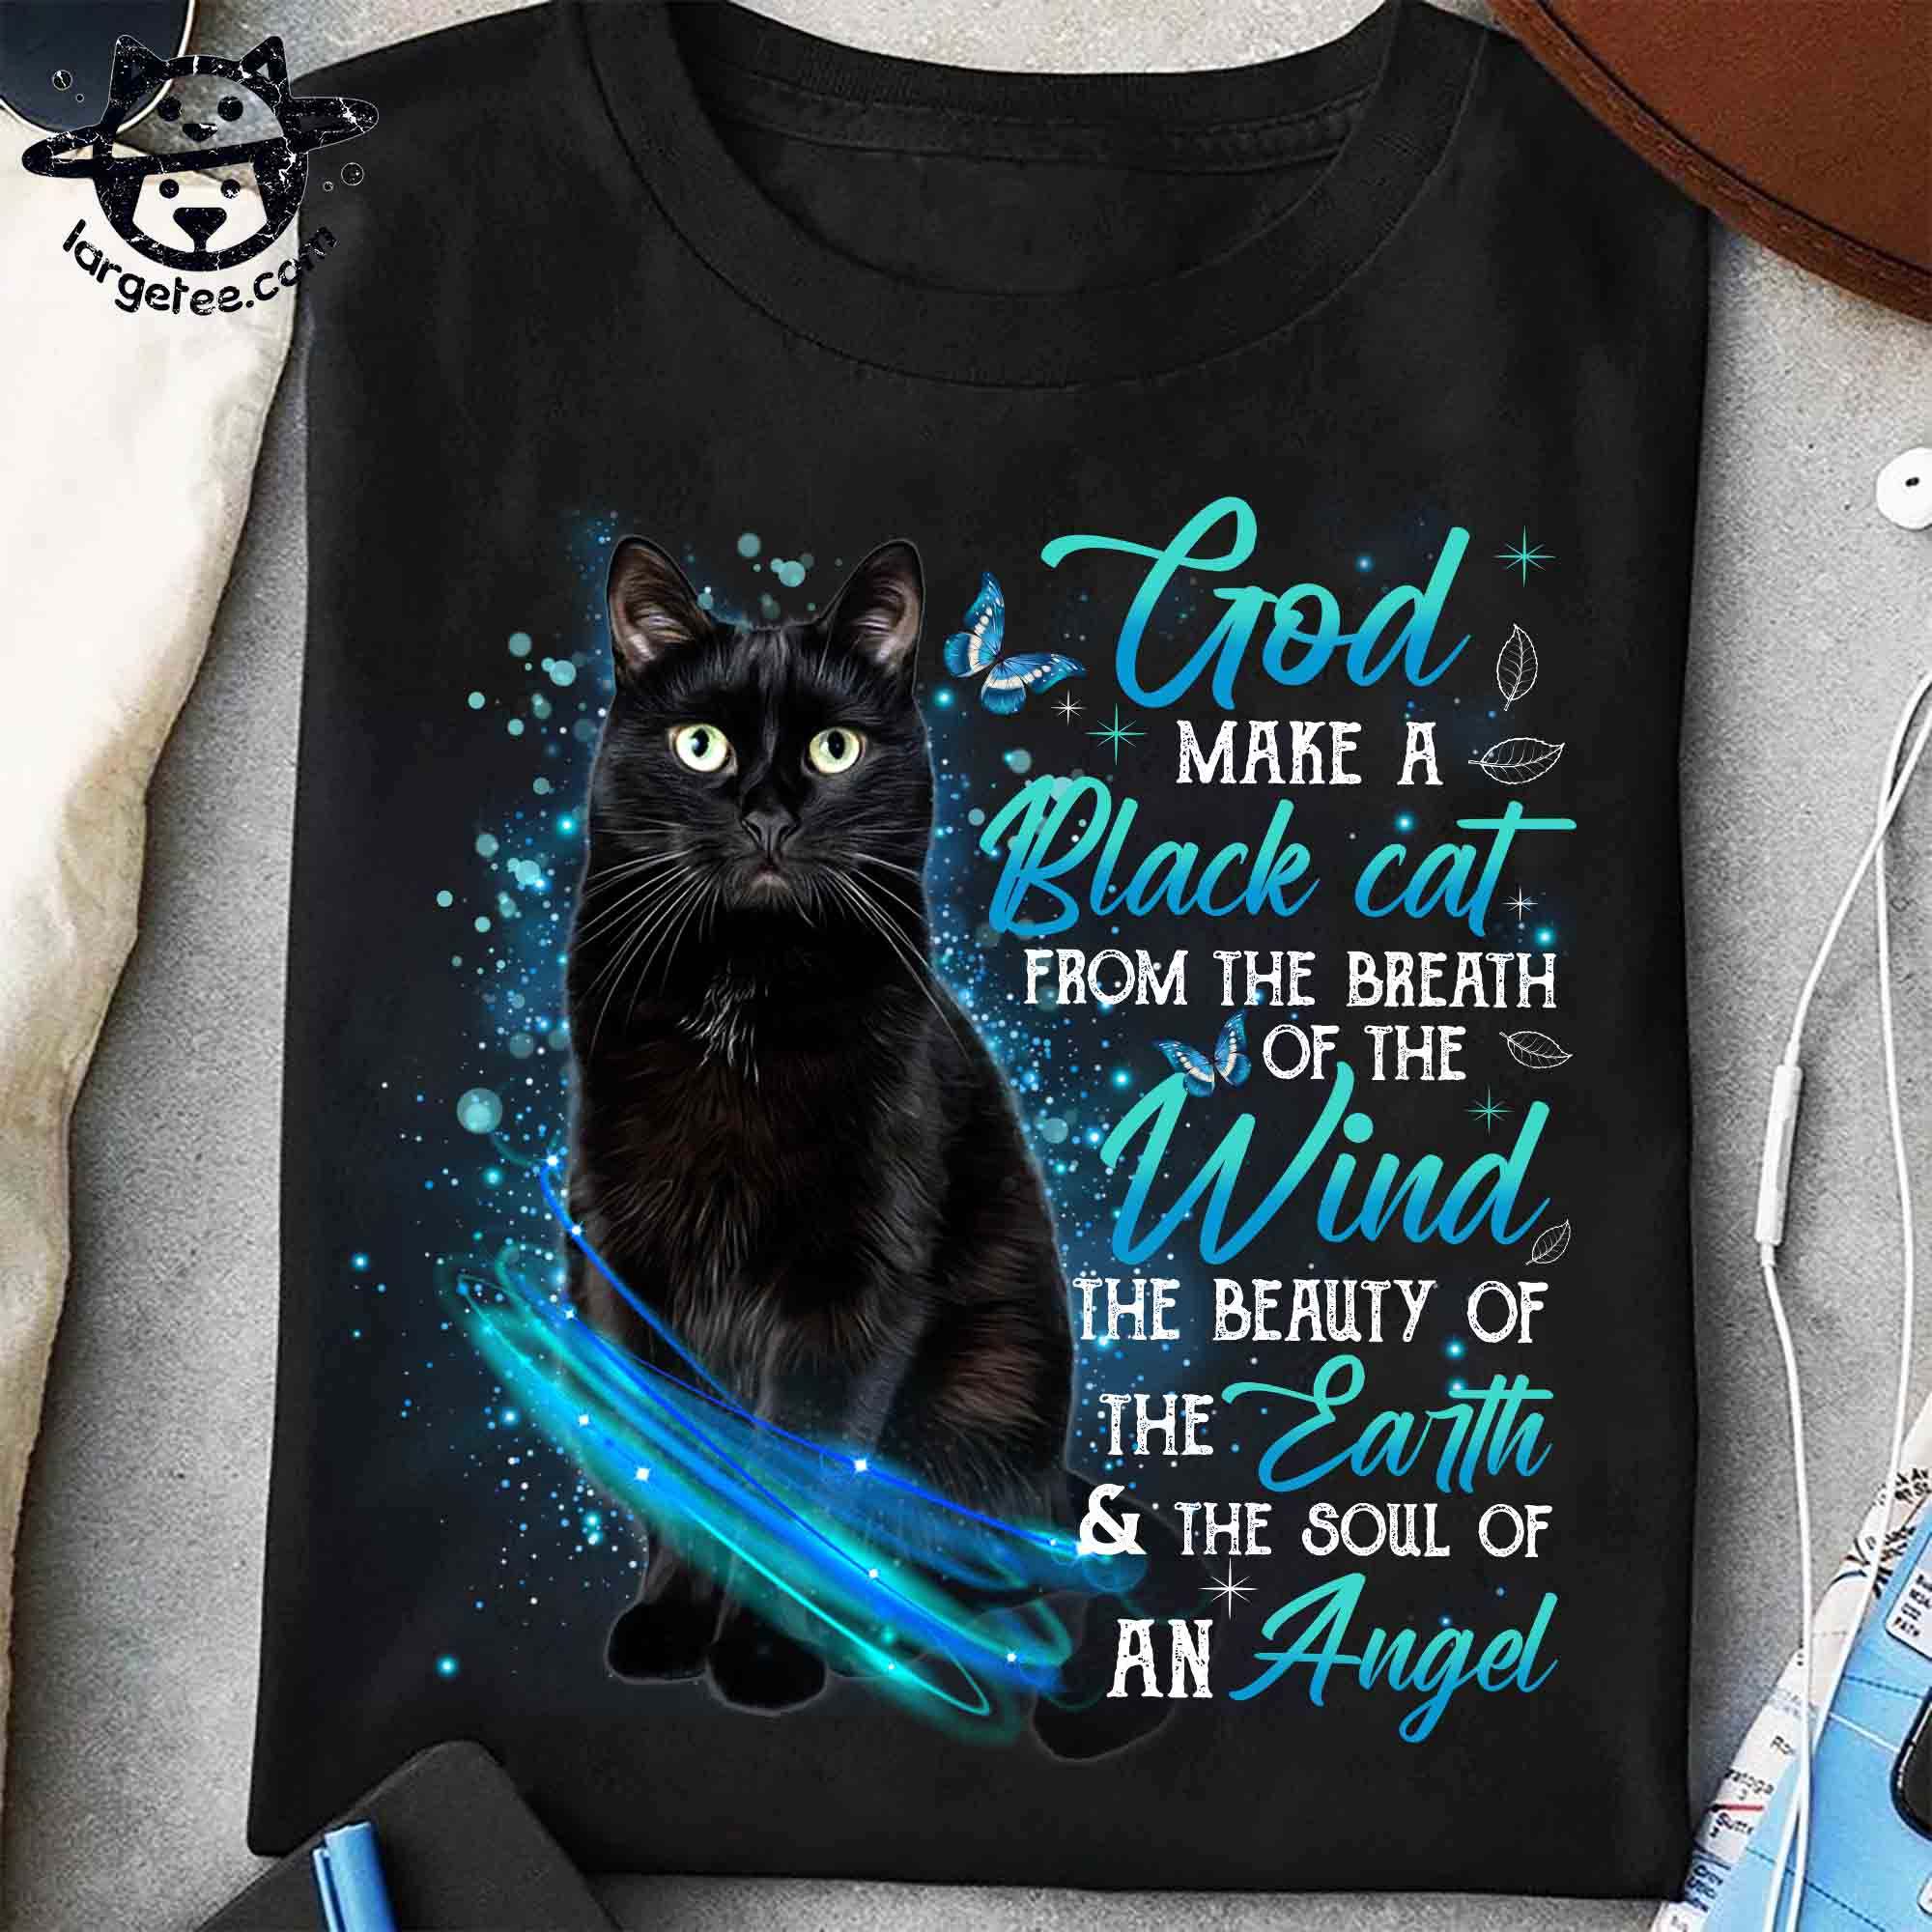 God Black Cat - God make a black cat from the breath of the wind the beauty of the earth